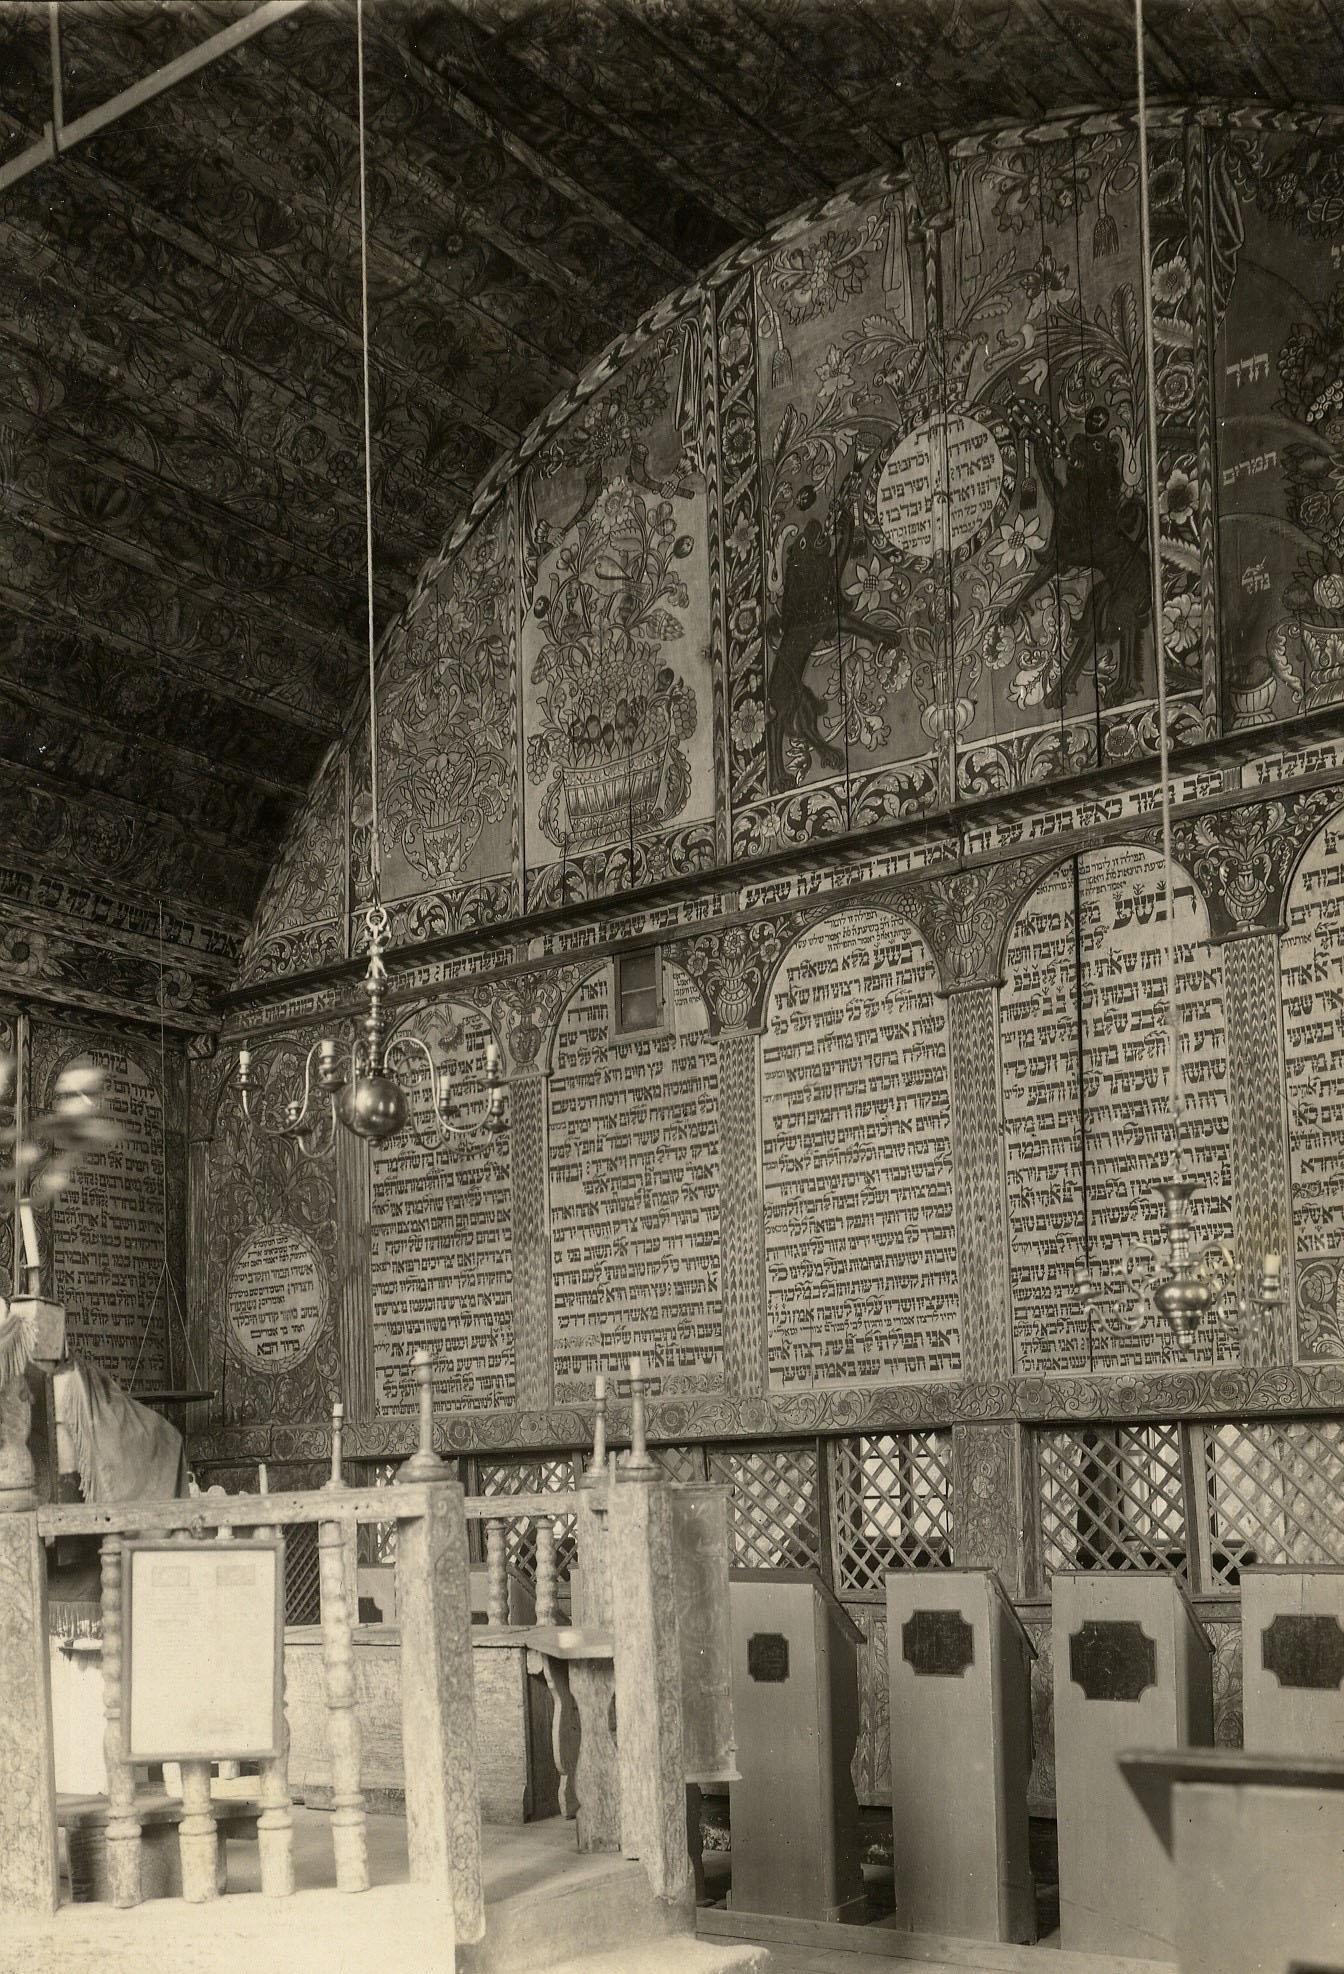 Interior of building of back wall with decorative images on top, Hebrew text in the middle, and lattice below, platform with railing in left foreground, and several podiums along wall.